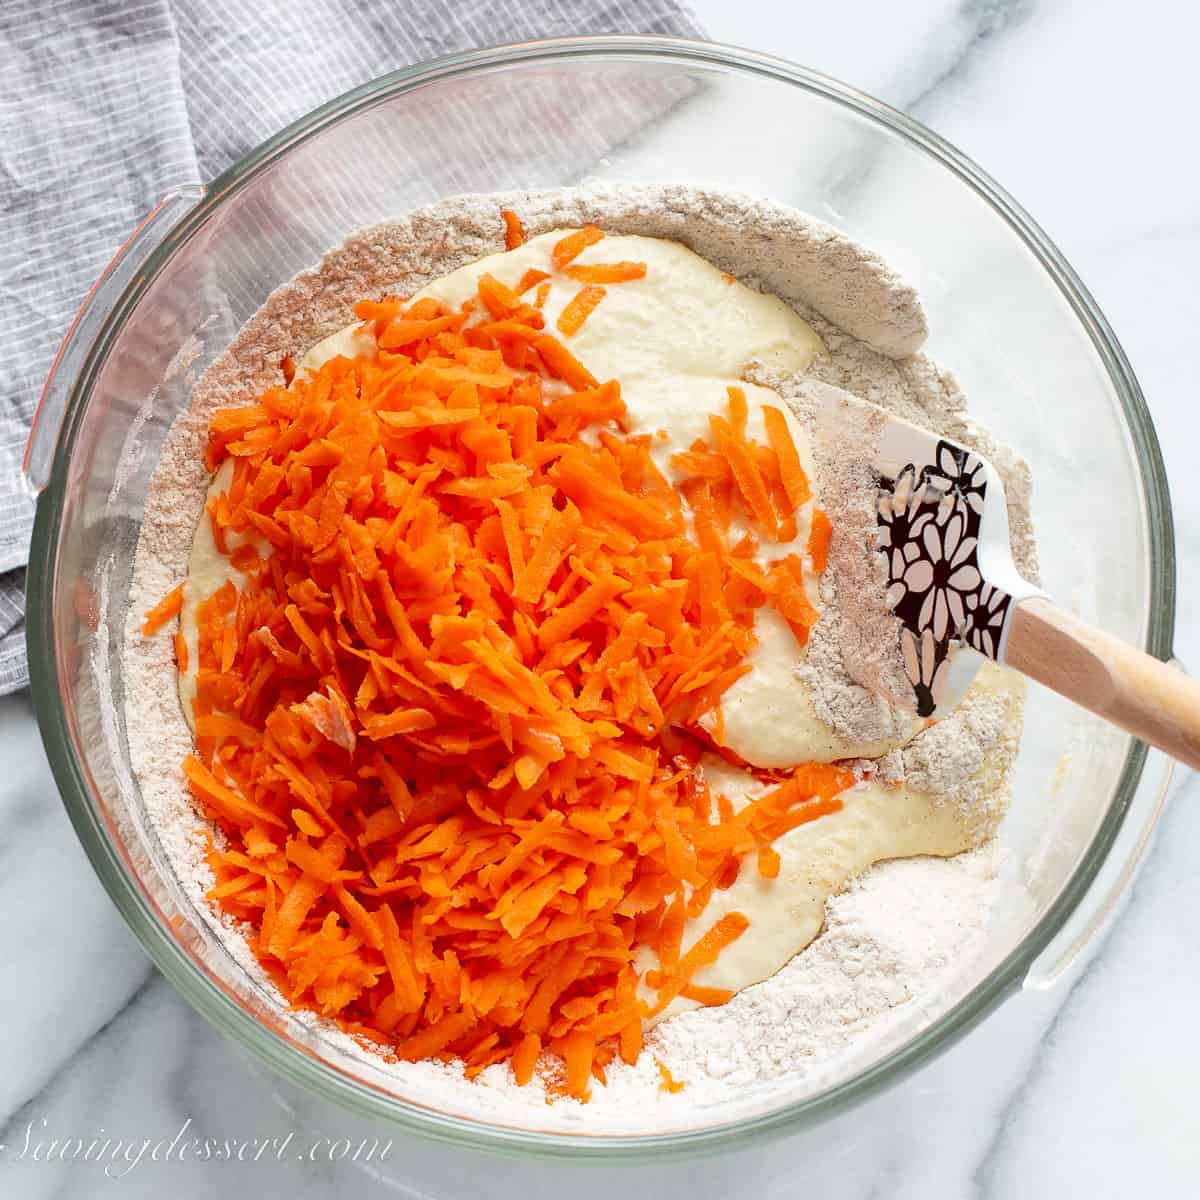 a bowl of muffin batter with shredded carrots